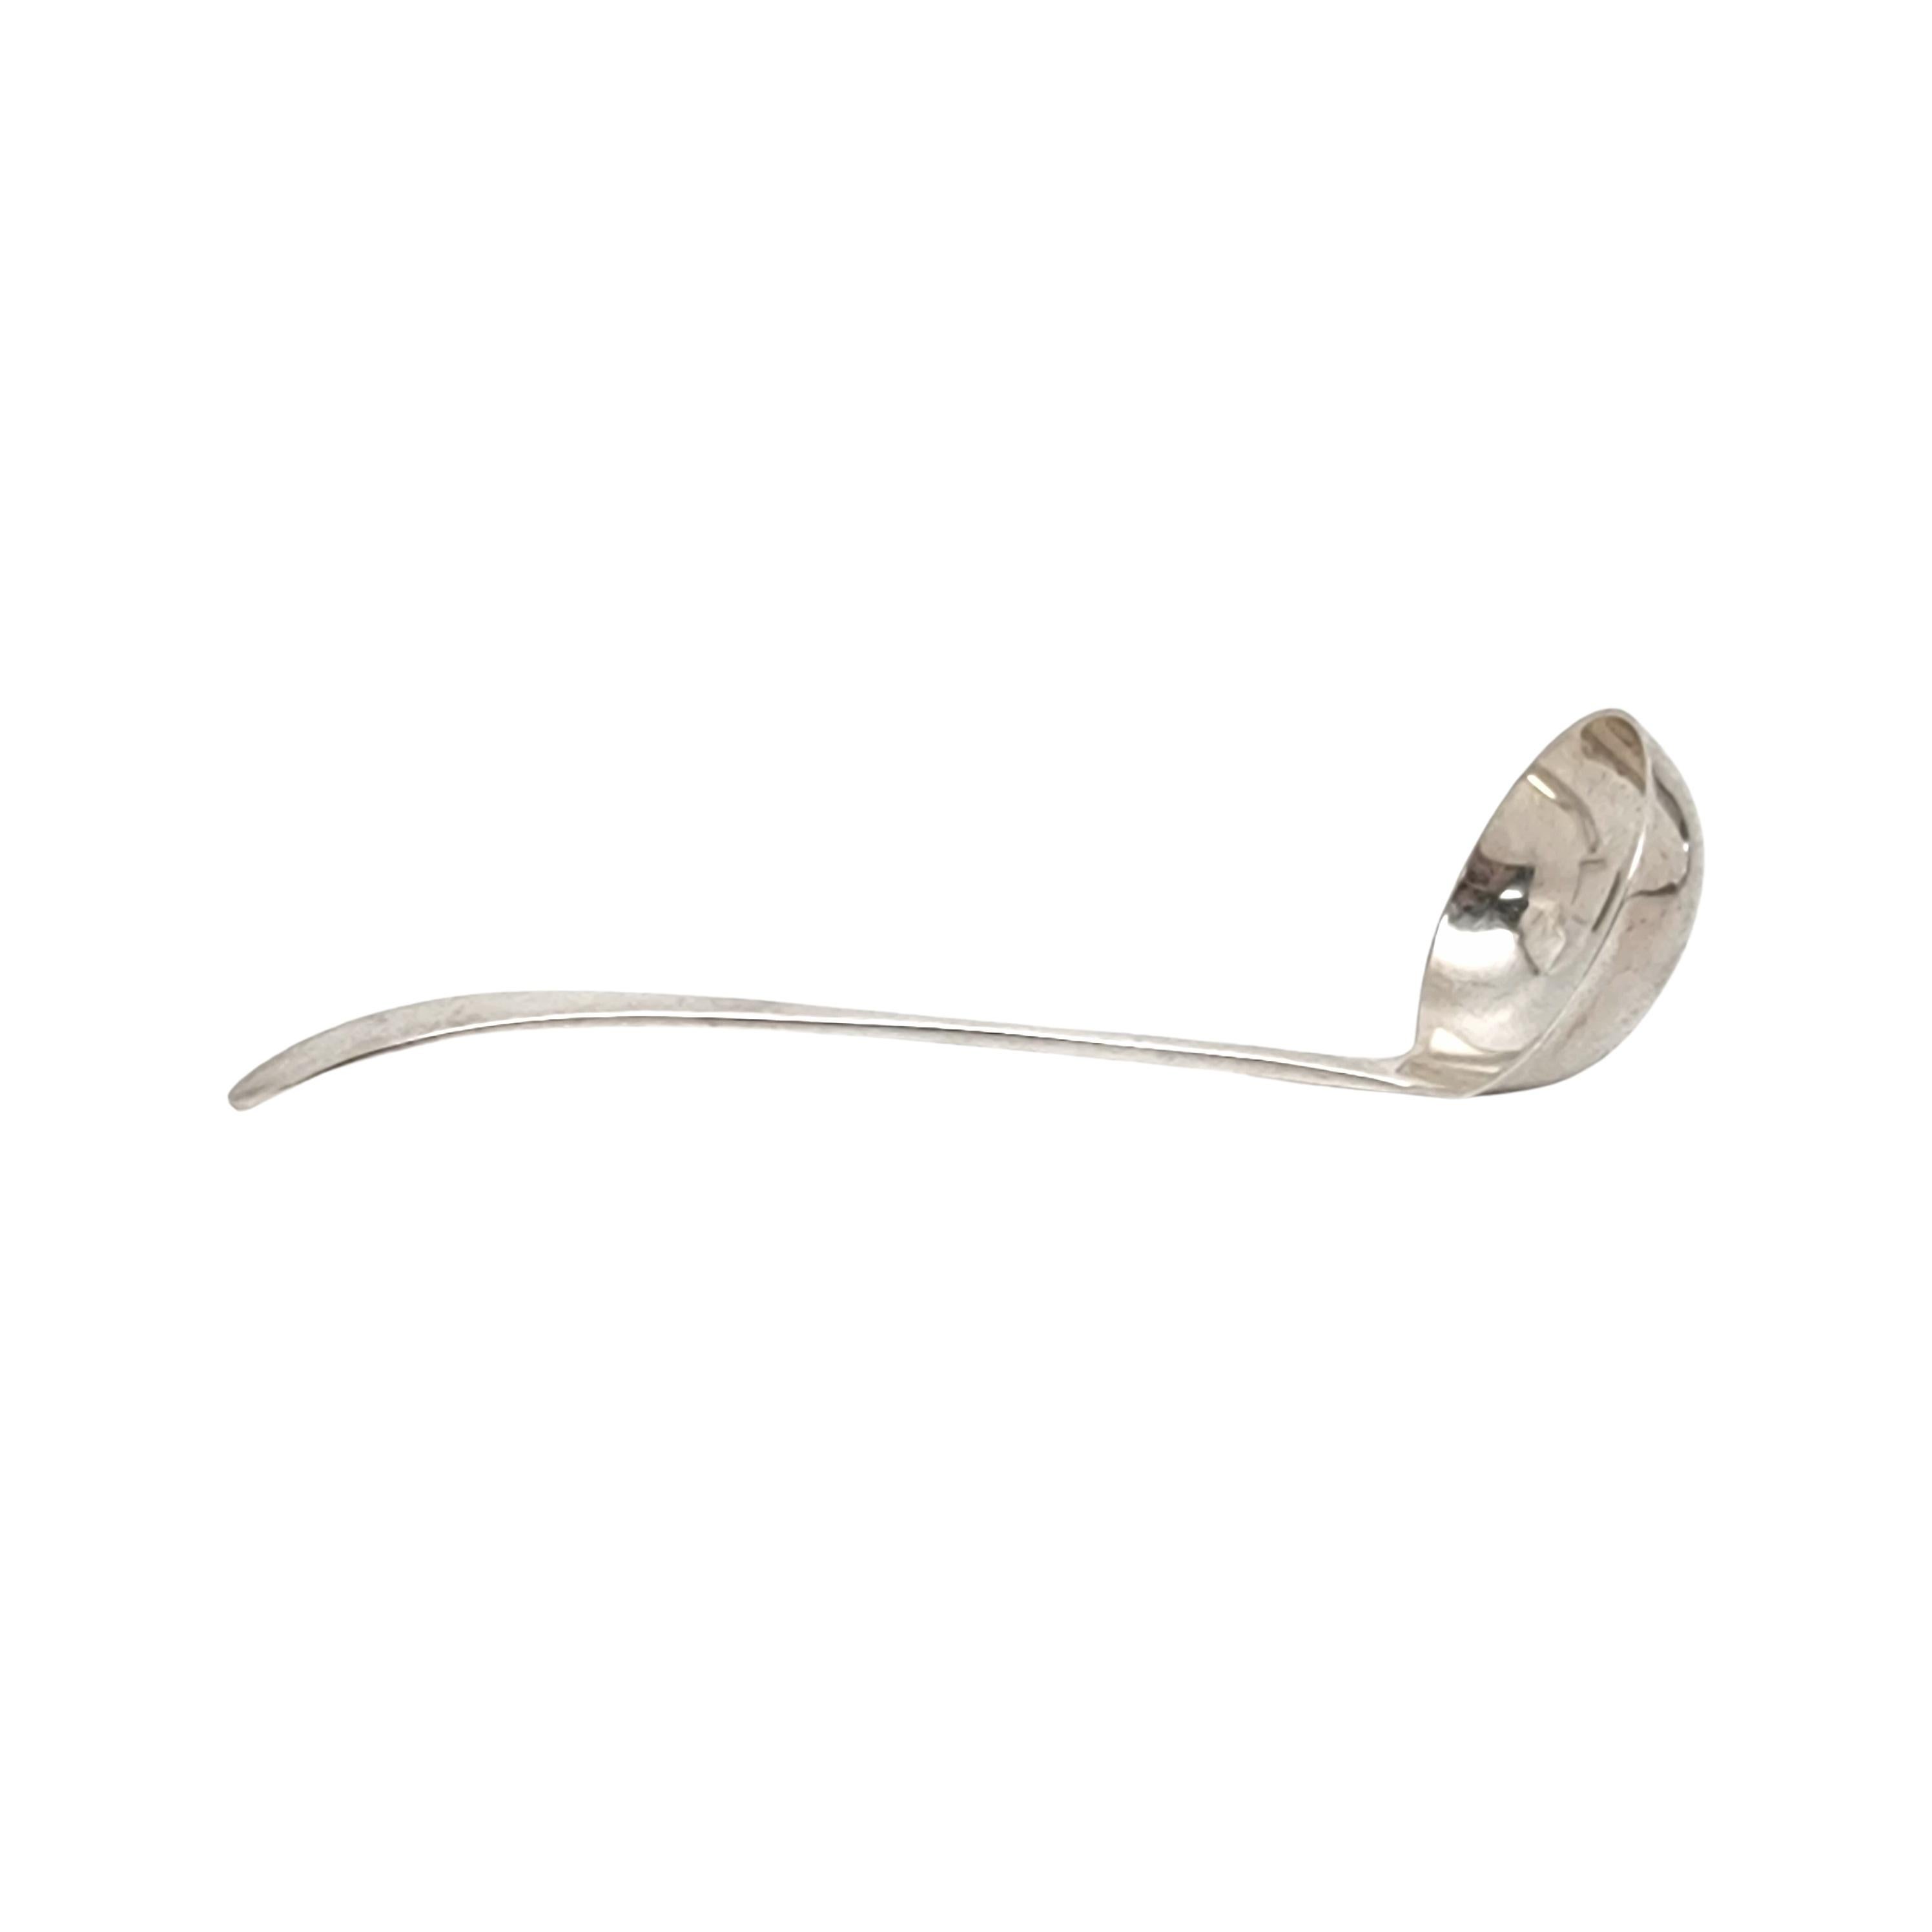 Tiffany & Co Sterling Silver Reproduction Edinborourgh Ladle (B) #13641 In Good Condition For Sale In Washington Depot, CT